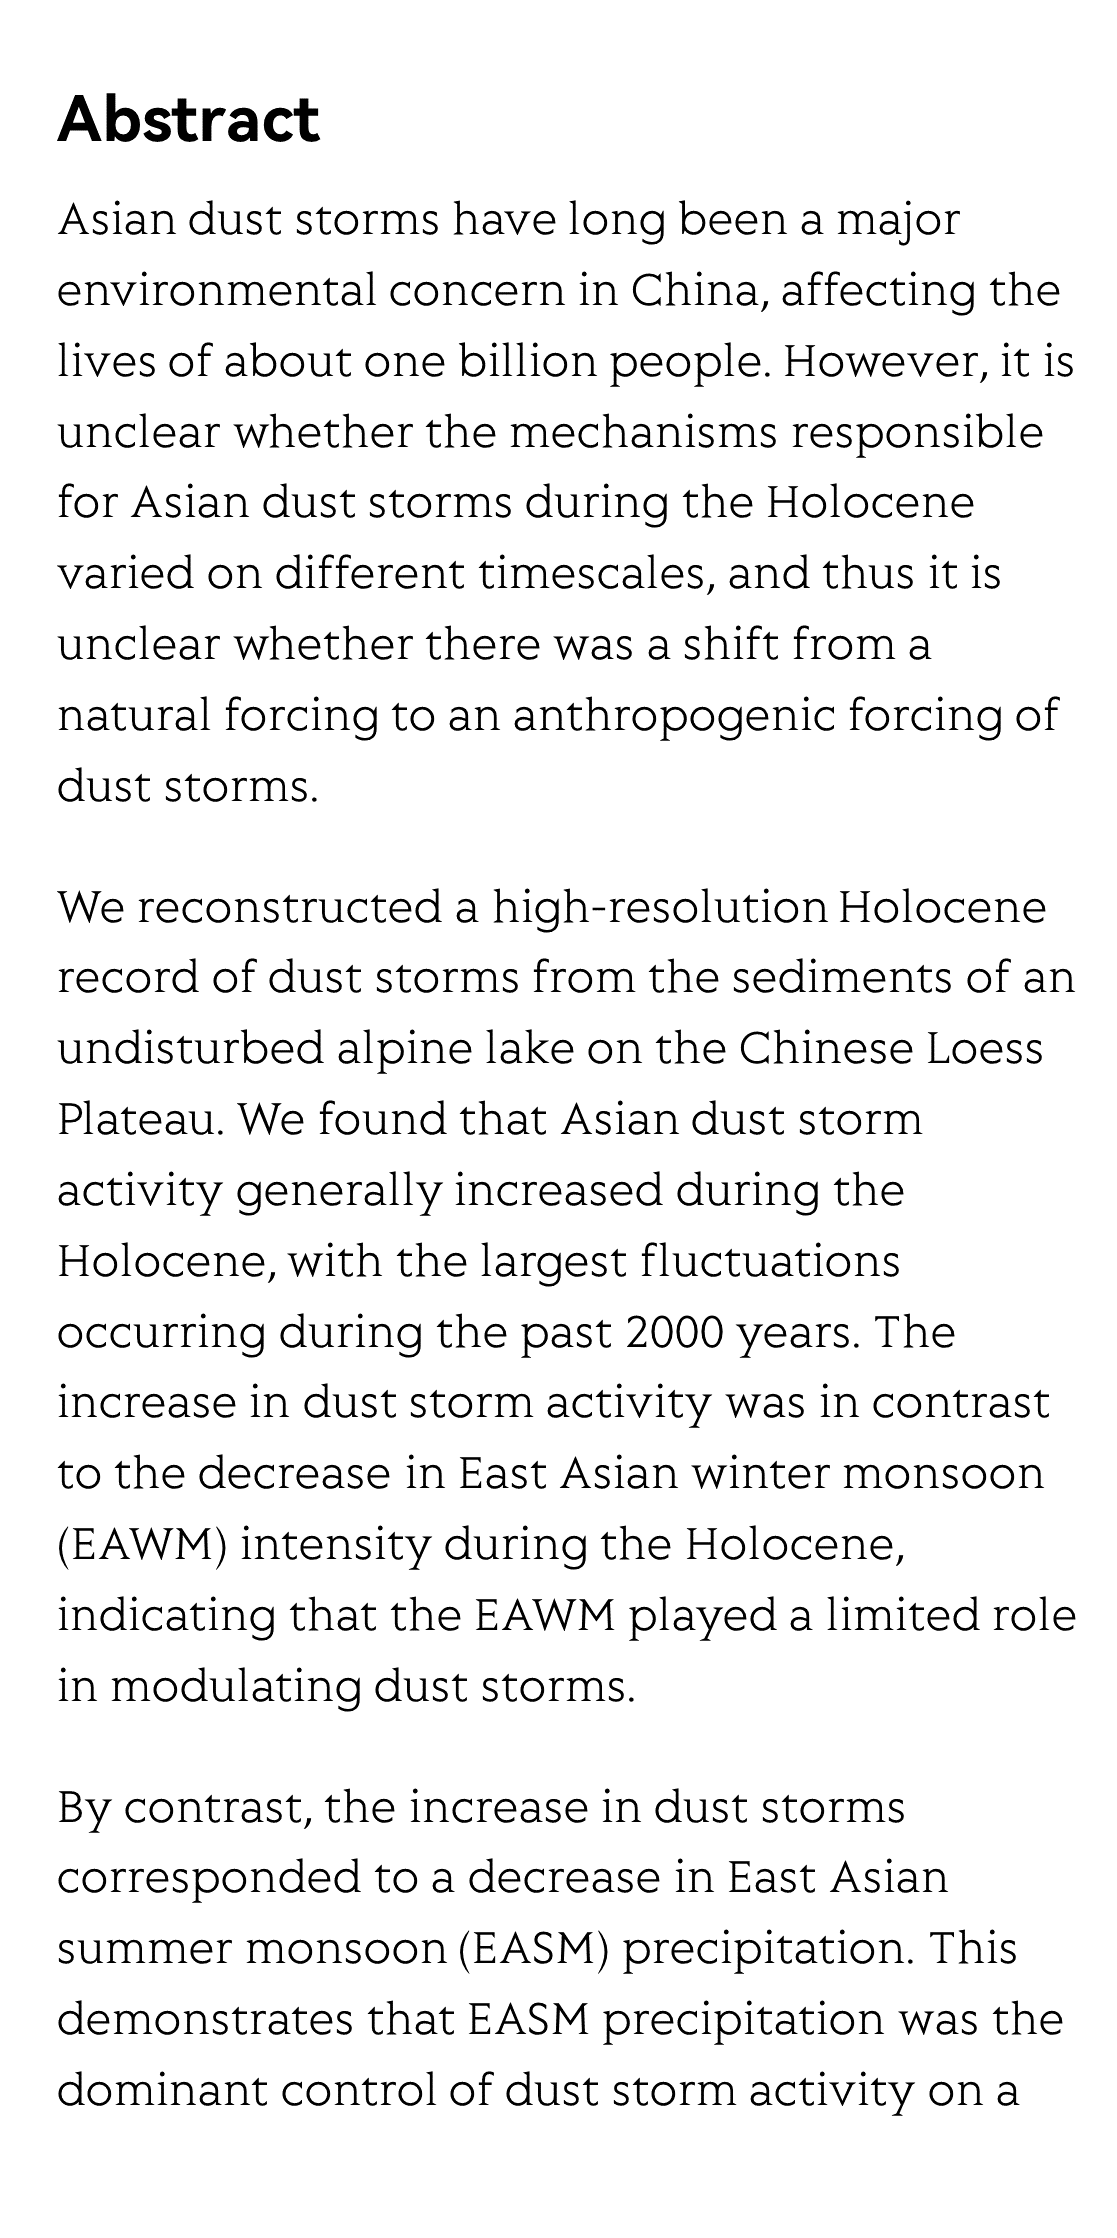 Holocene dust storm variations over northern china: transition from a natural forcing to an anthropogenic forcing_2